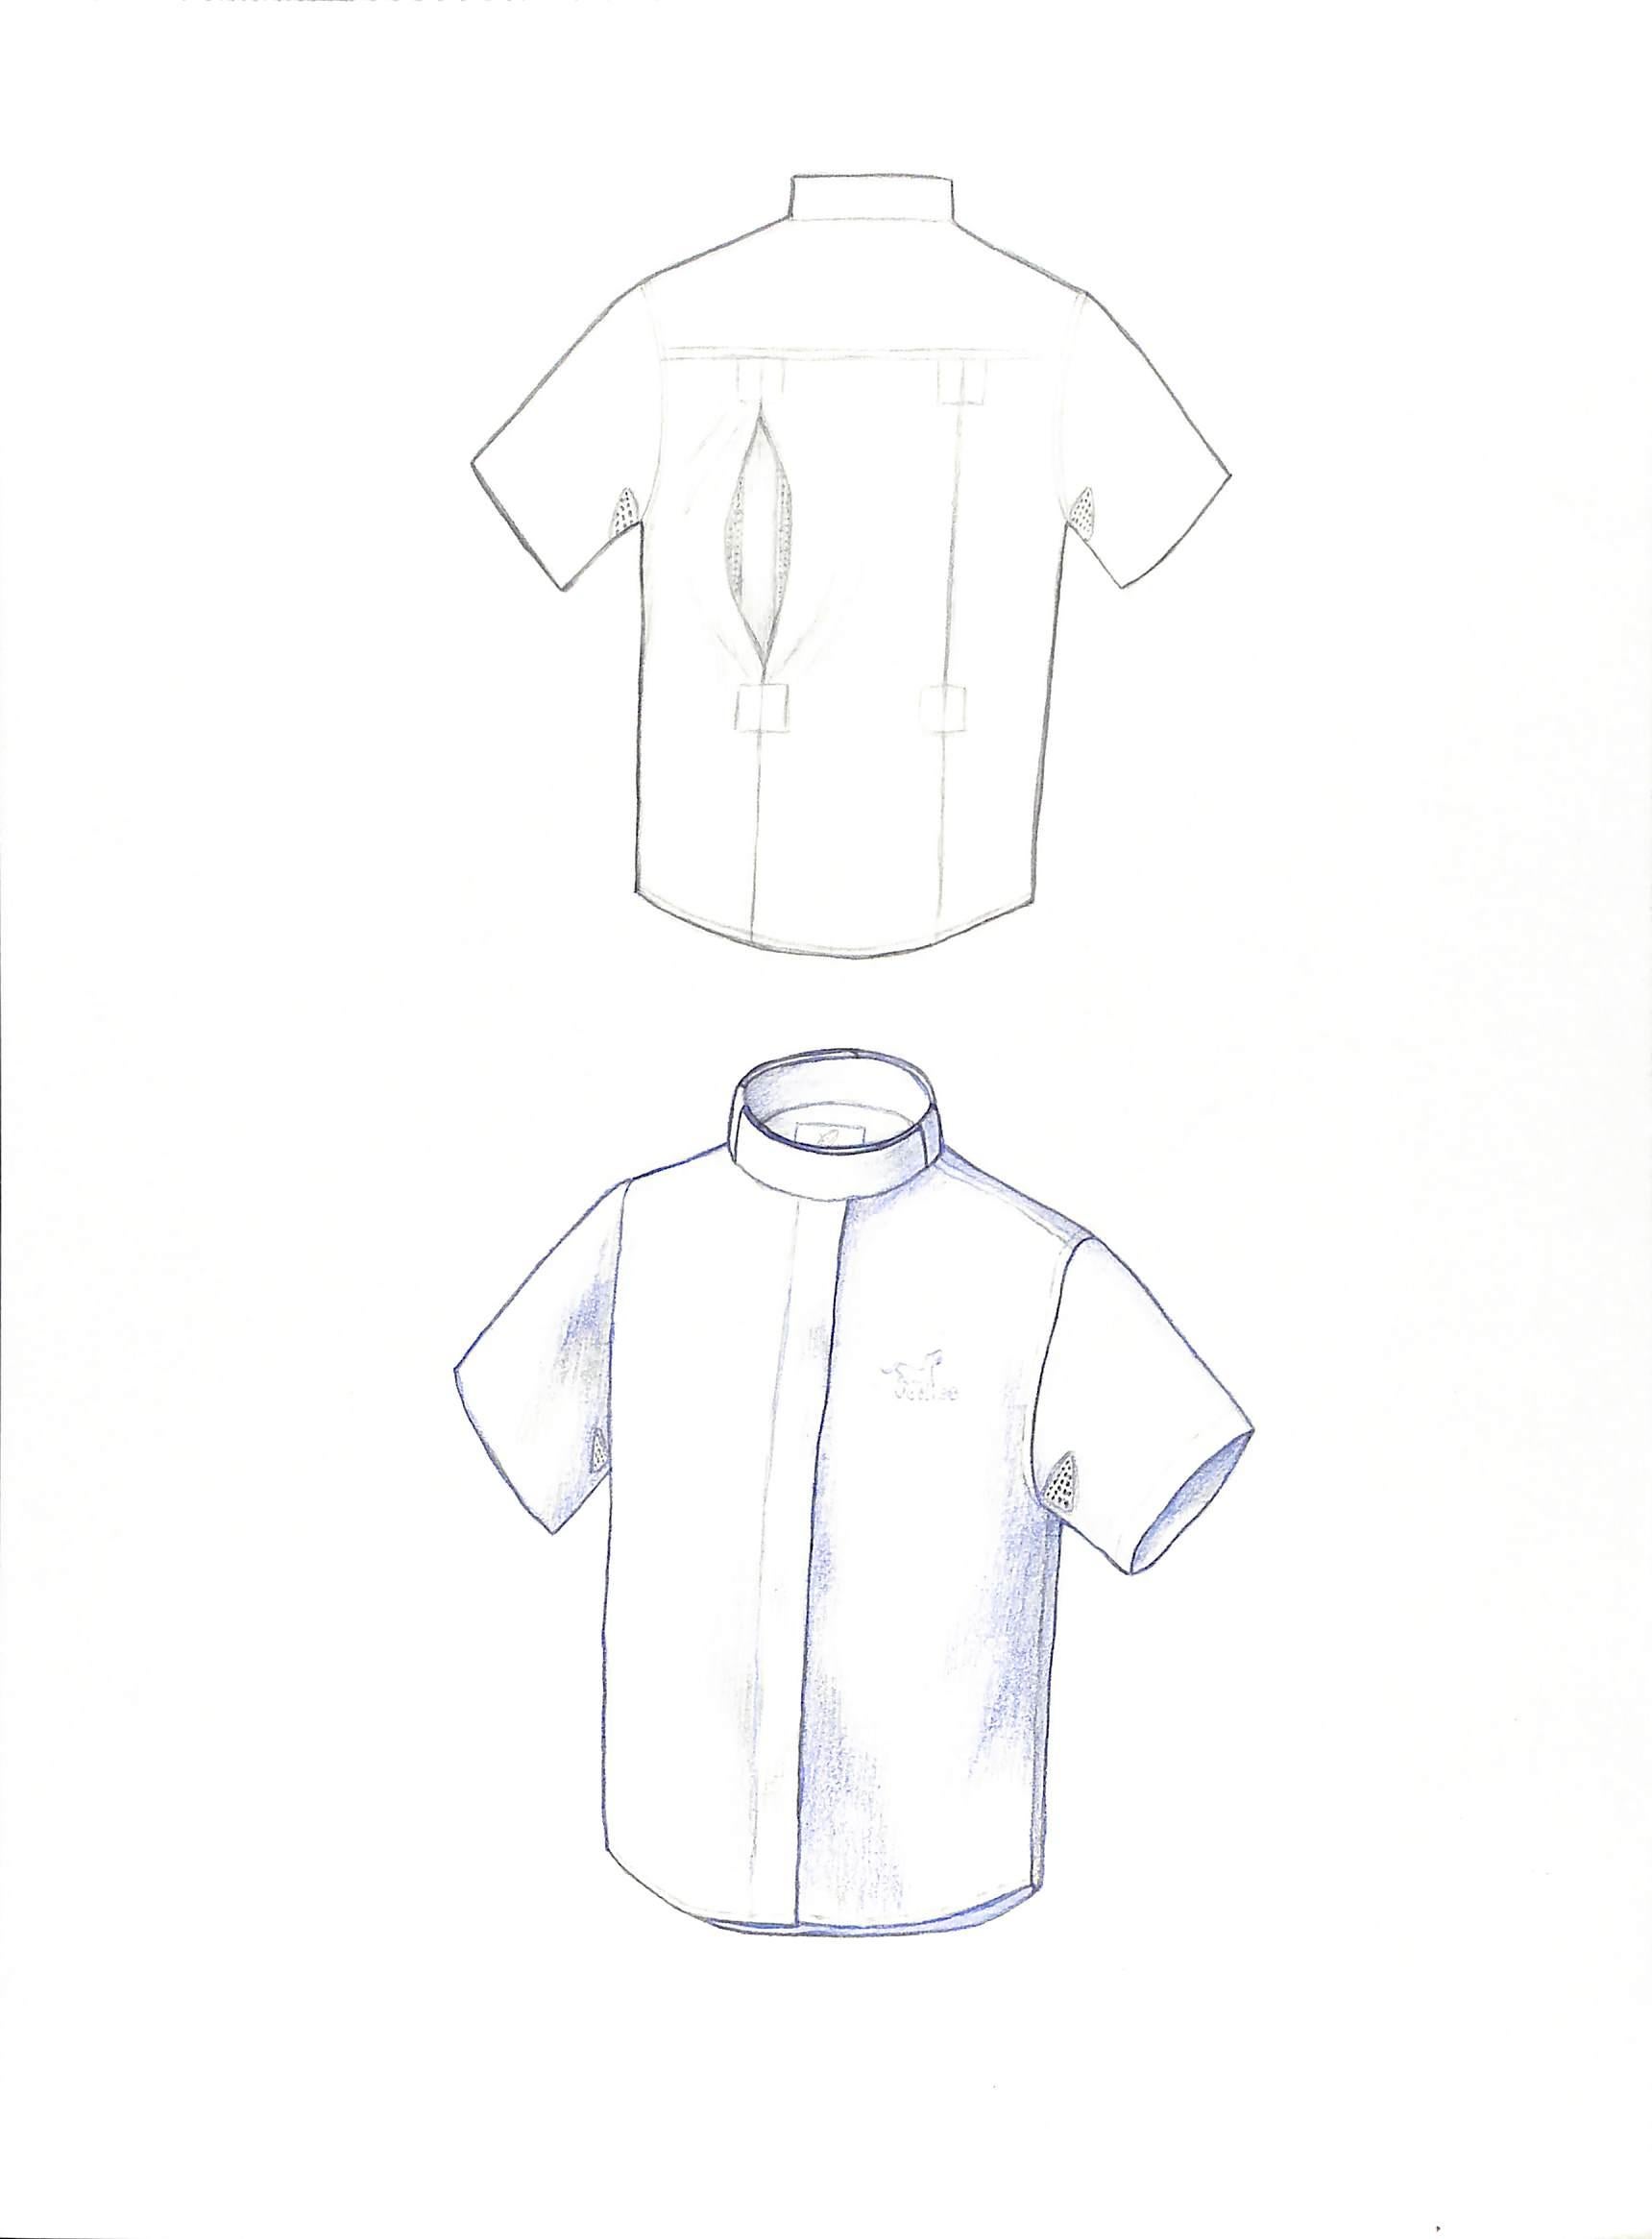 Childrens Vented Shirt Graphite Drawing - Art by Unknown